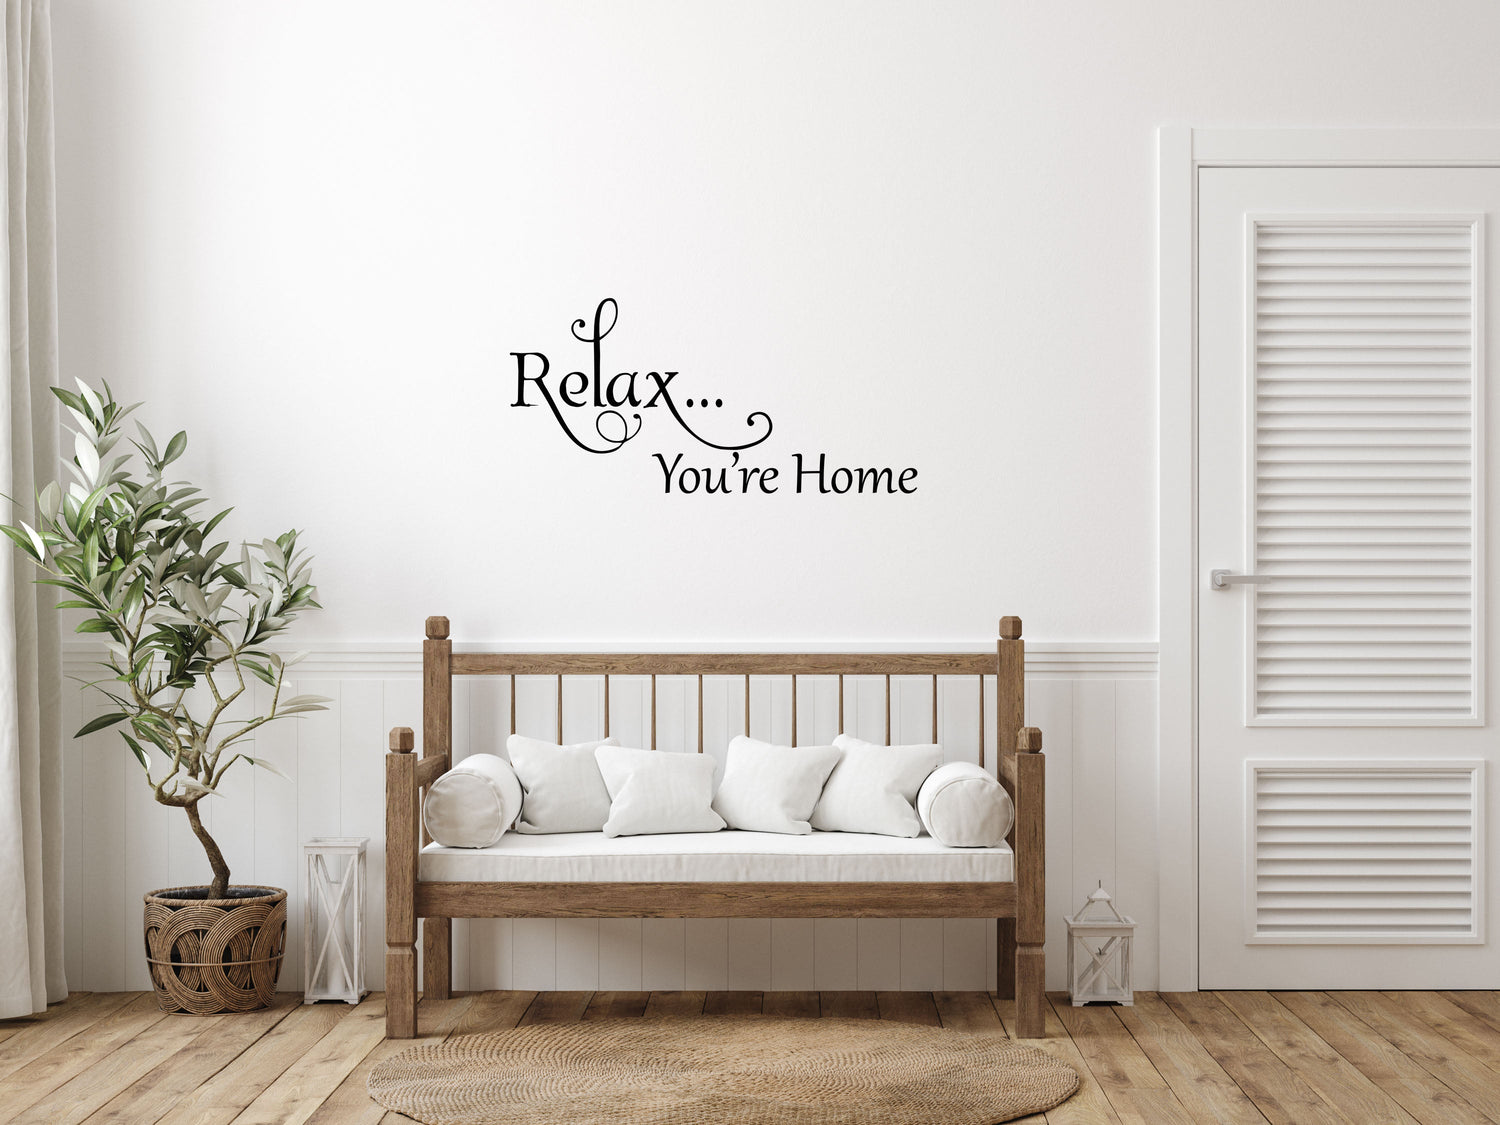 Relax You're Home - Inspirational Wall Decals Vinyl Wall Decal Inspirational Wall Signs 